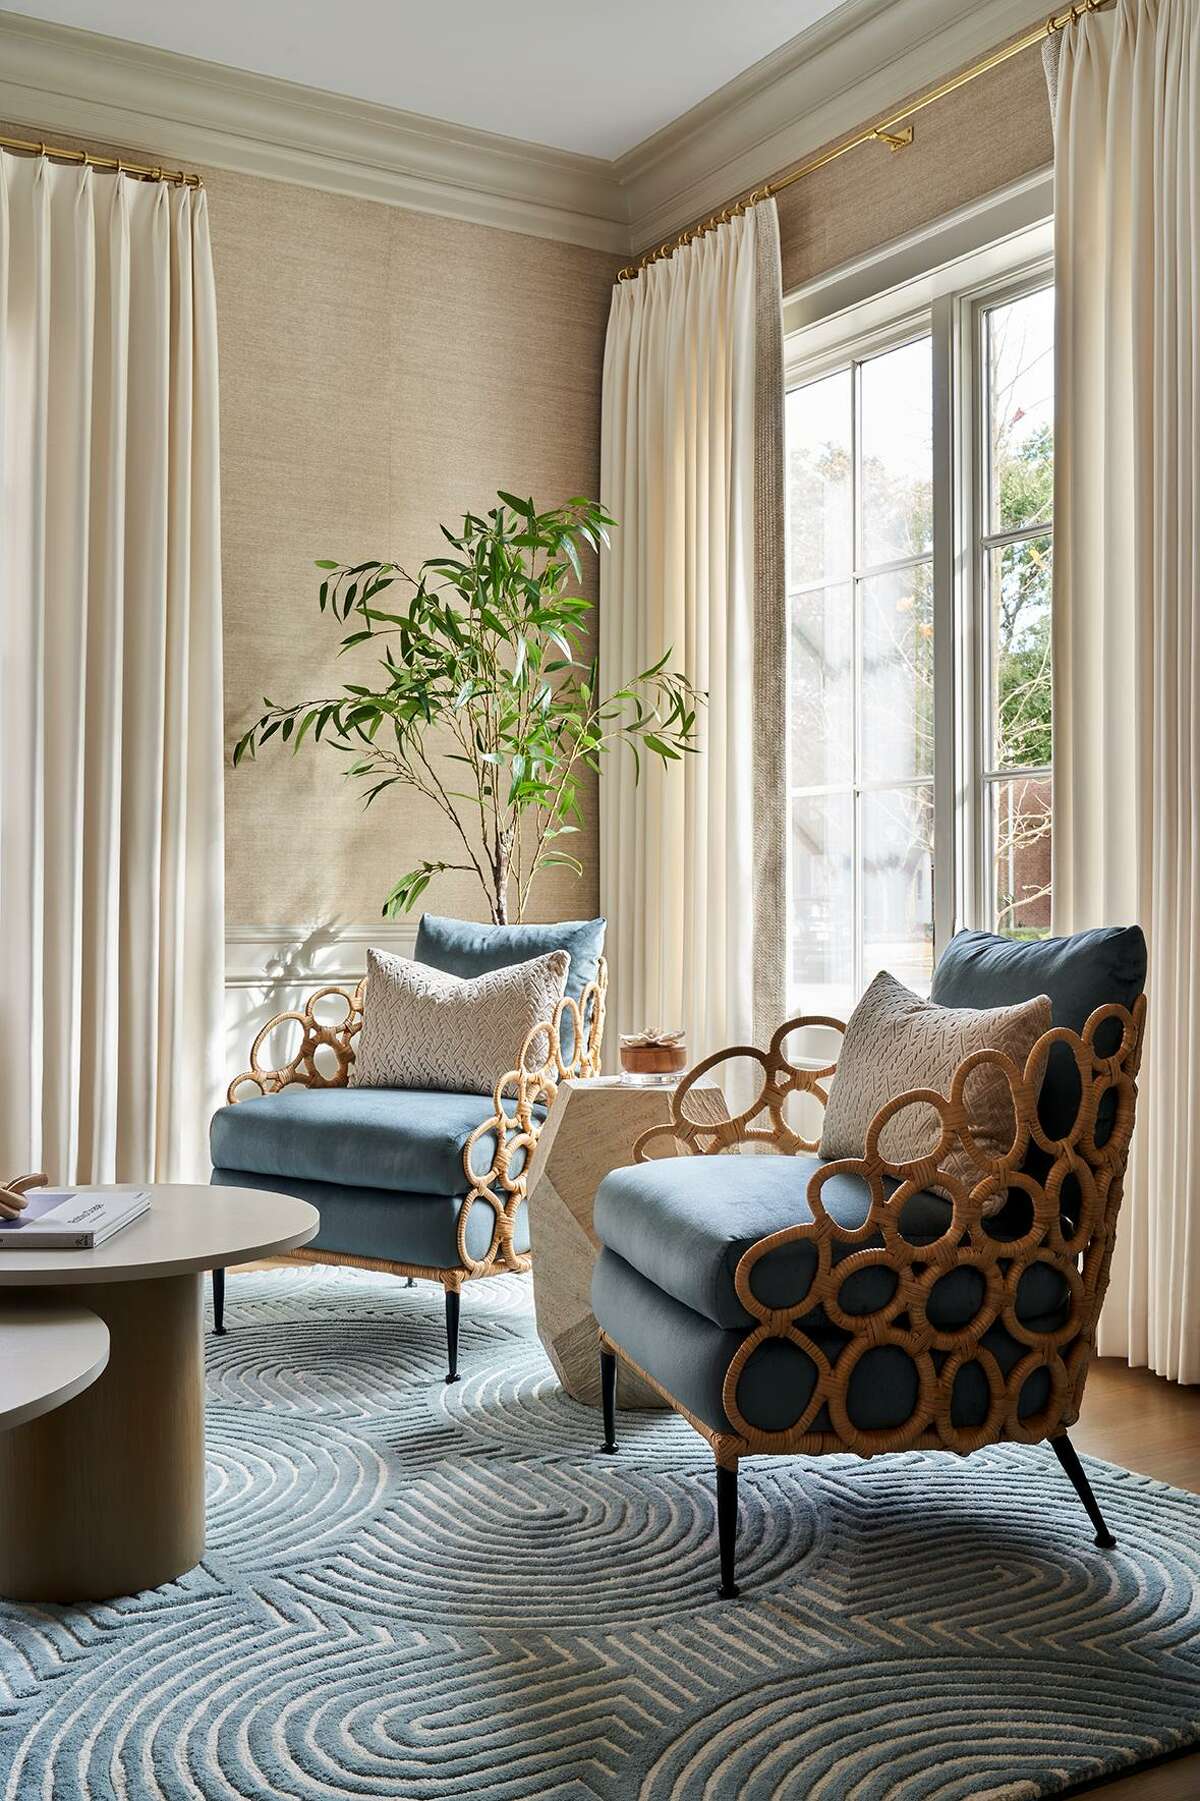 Tiffany Nguyen loves the style of Palecek furniture, and added a pair of the brand’s chairs to the formal living room.